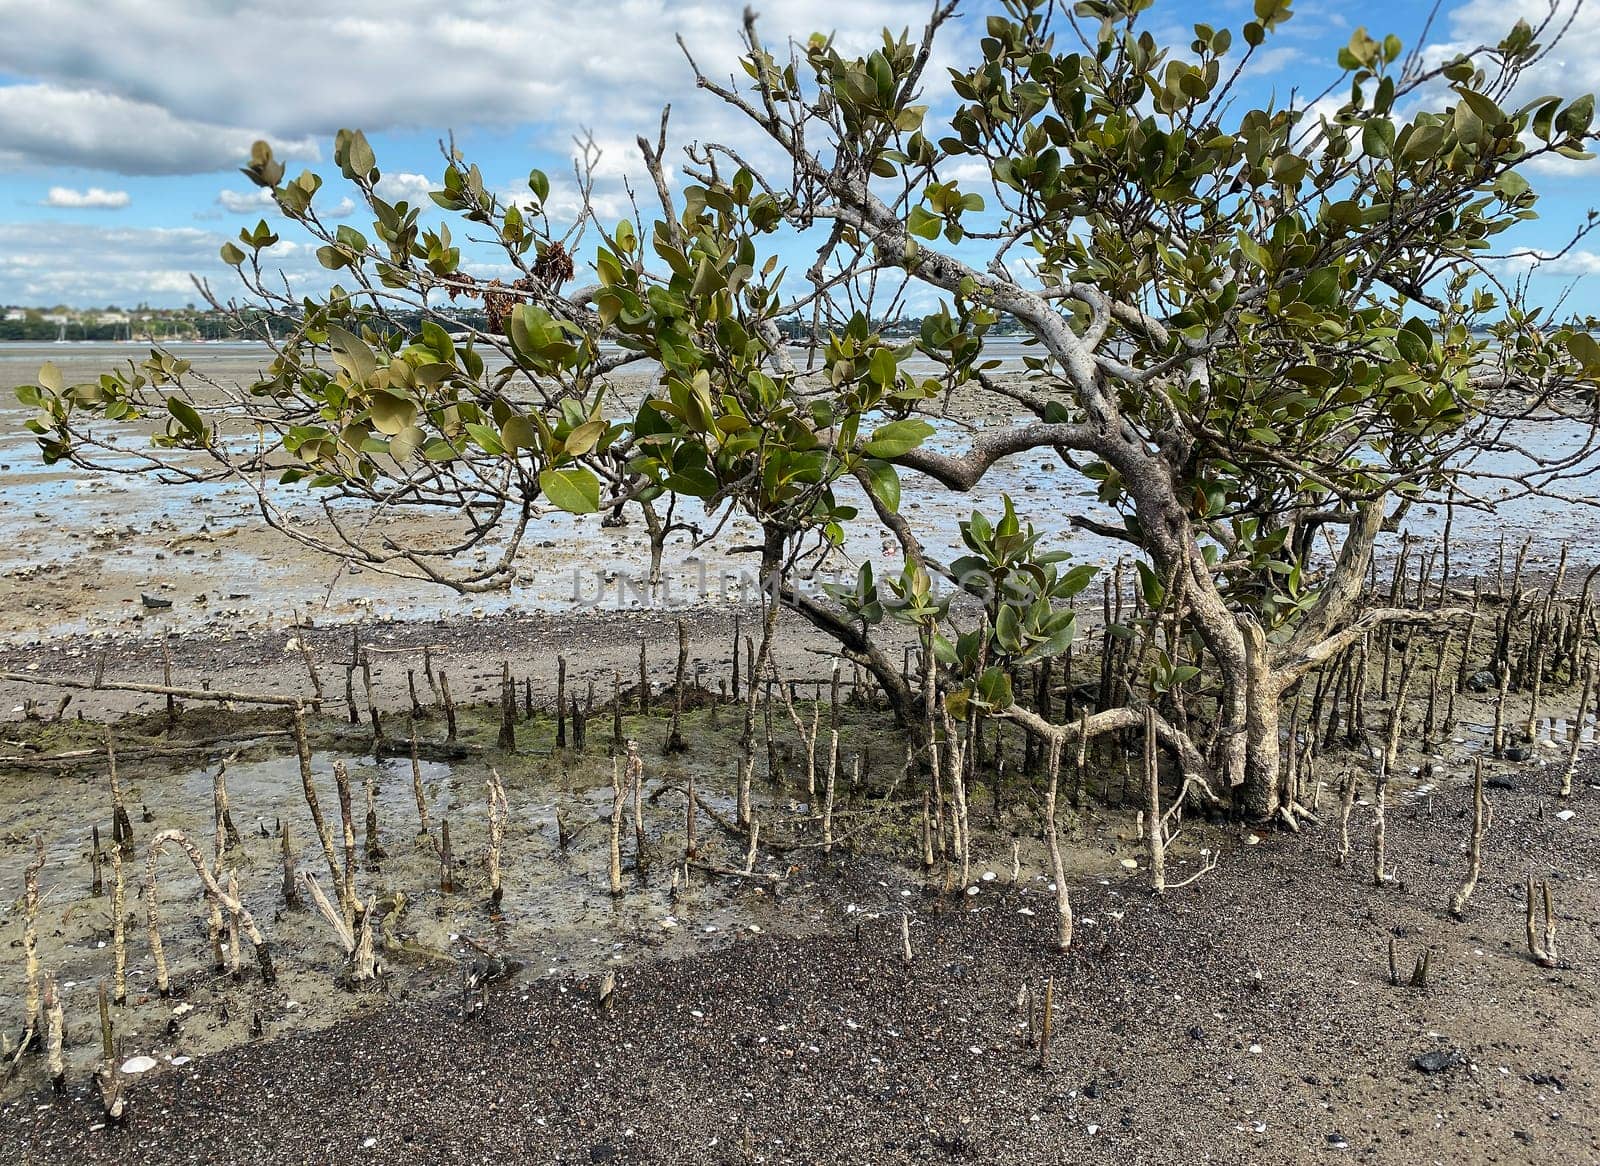 Green young Mangrove trees and pnematophores - roots growing from the bottom up for gas exchange. Planting mangroves in coastal sea lane, New Zealand by Proxima13